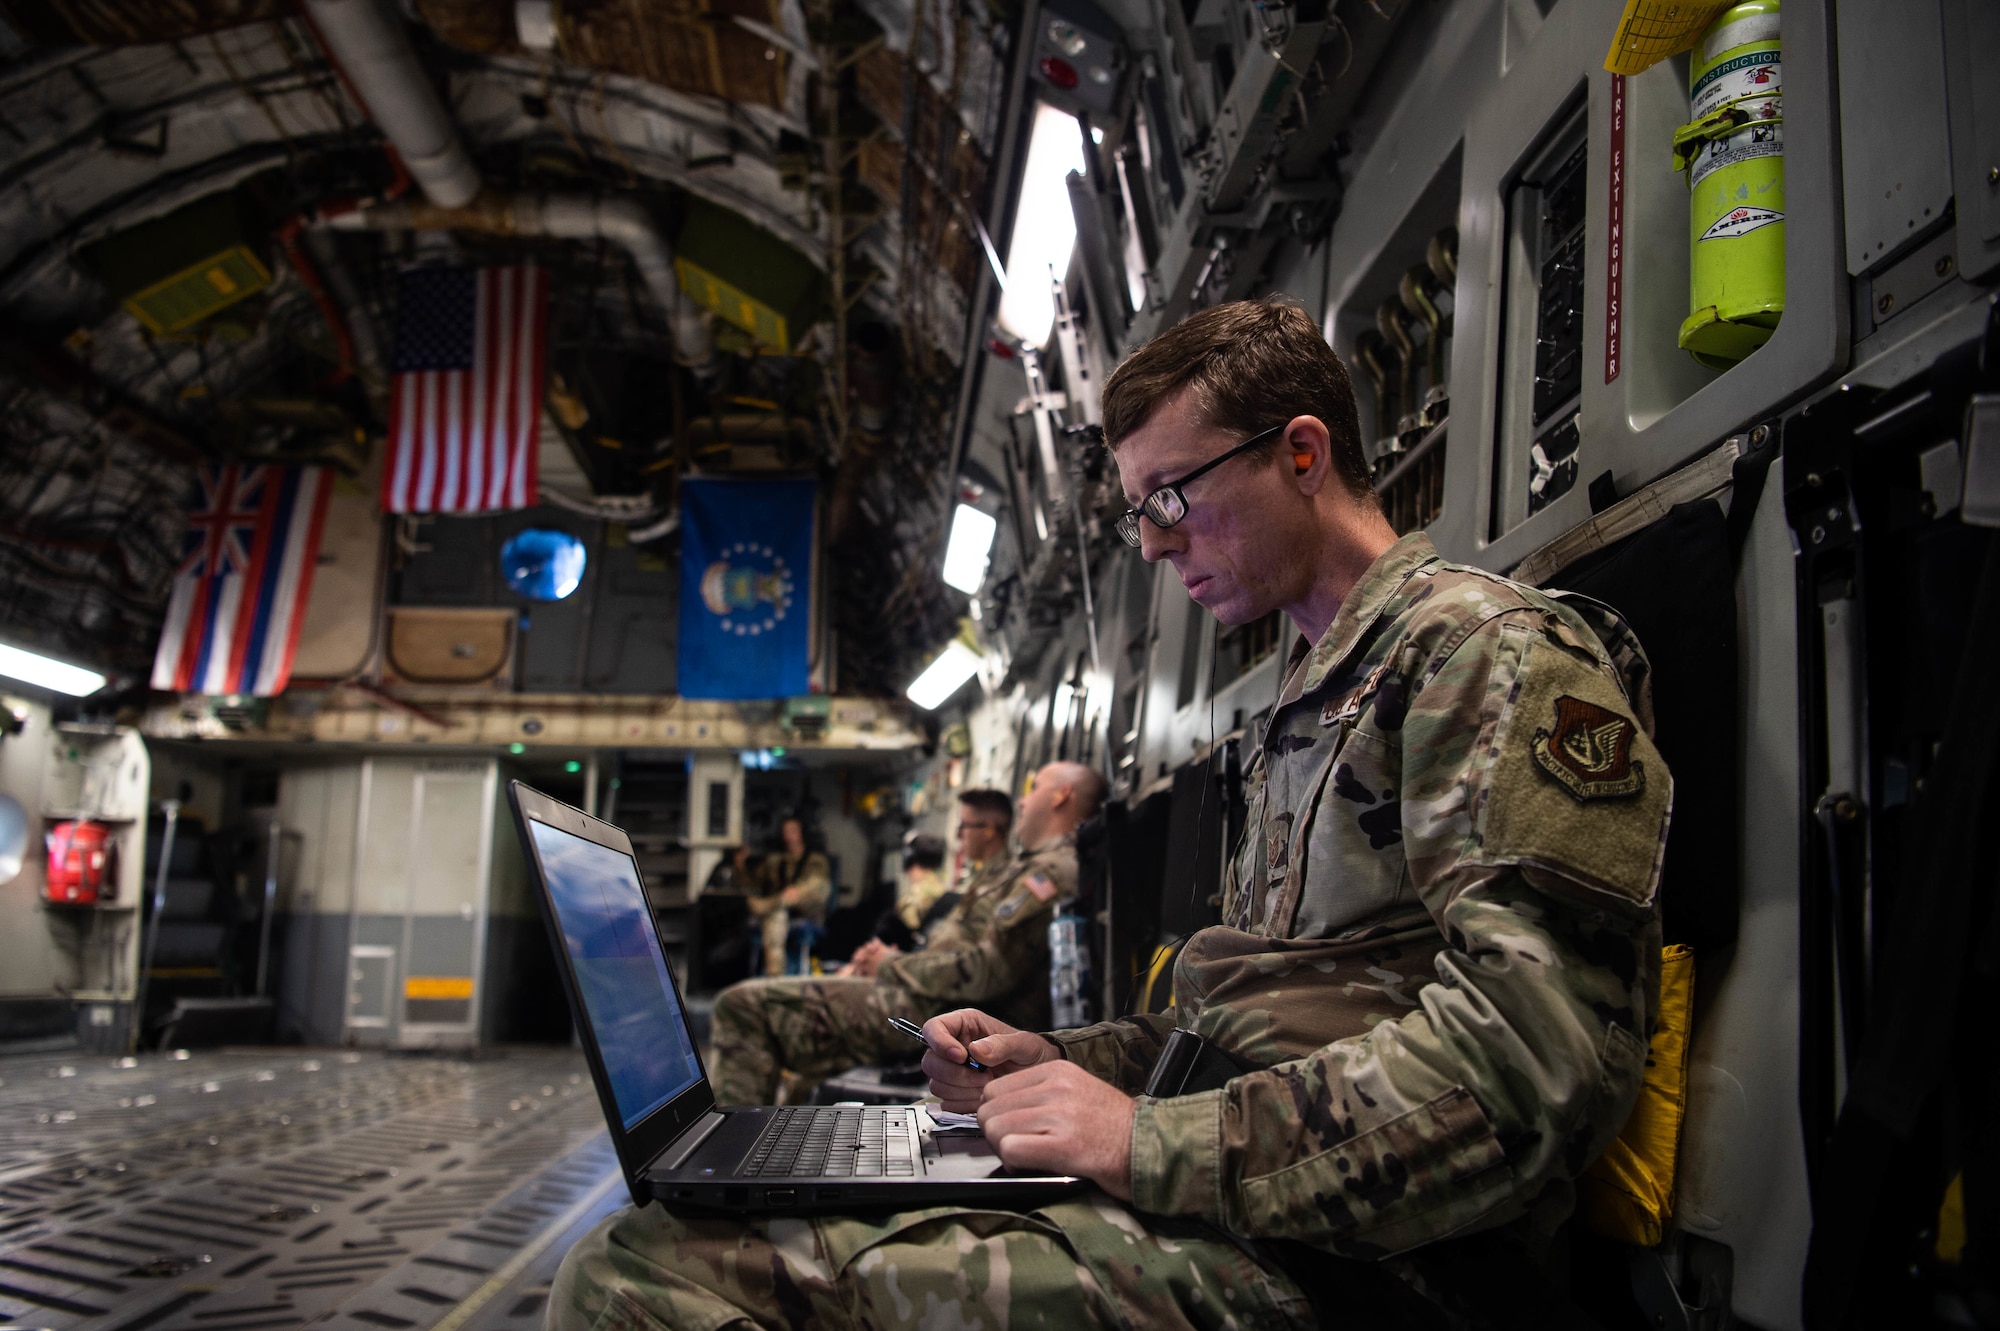 Tech. Sgt. Carl Williams, 747th Cyberspace Squadron standards and evaluations craftsman, observes radio frequencies recorded by a stand-alone hub activity reconnaissance kit in a C-17 Globemaster III around the Hawaiian Islands, Nov. 3, 2021. The end goal of the “SHARK” kit is to be able to detect and cancel radio frequency jamming. (U.S. Air Force photo by Staff Sgt. Alan Ricker)